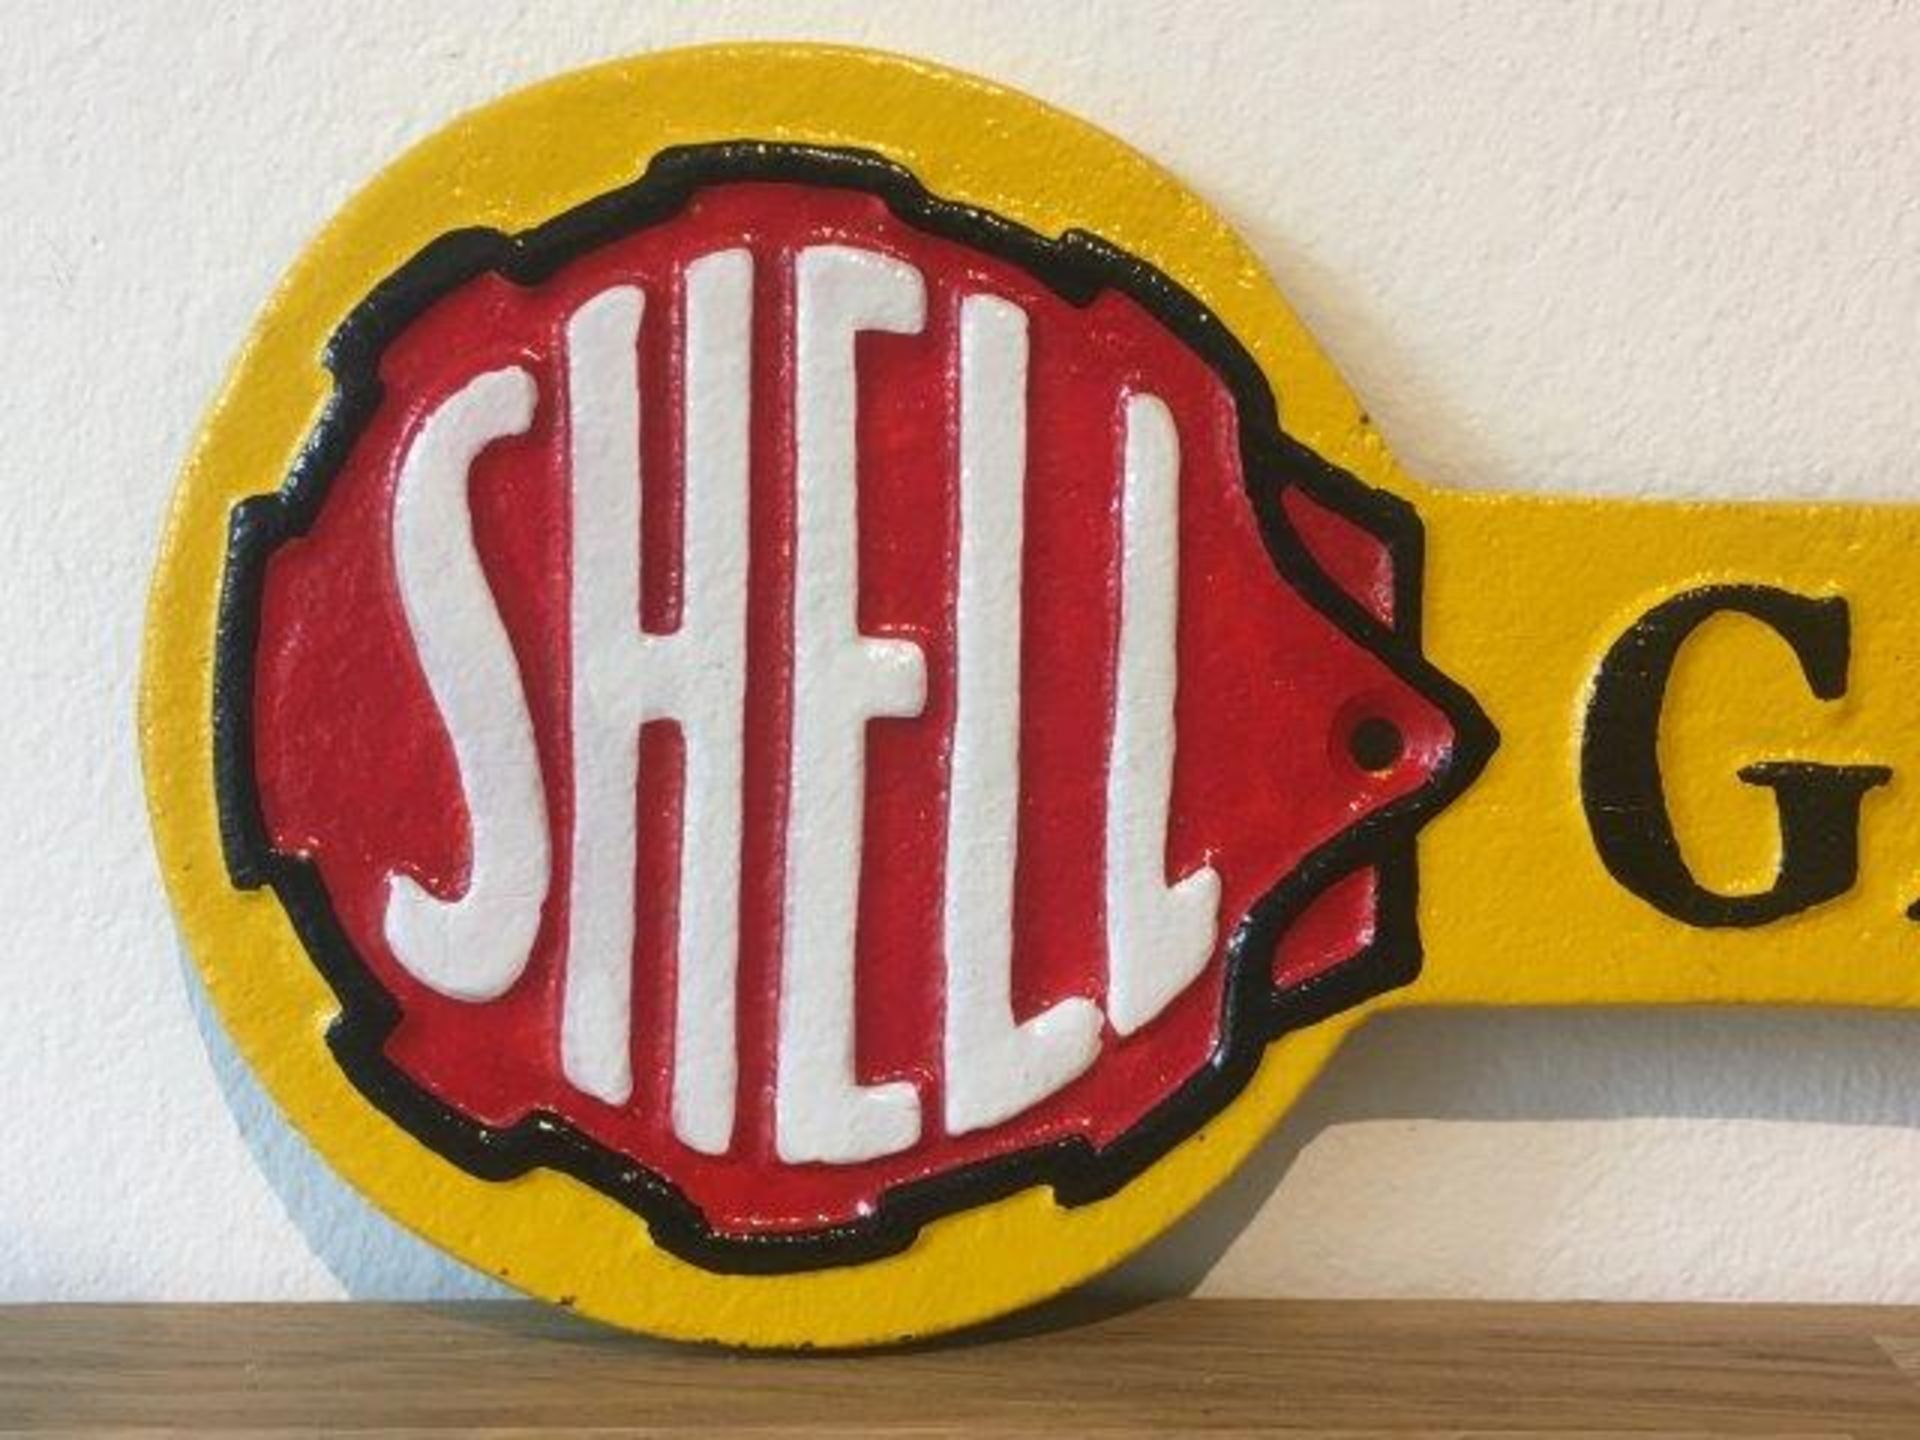 Shell Oil Cast Iron Garage Arrow Sign - Image 2 of 3